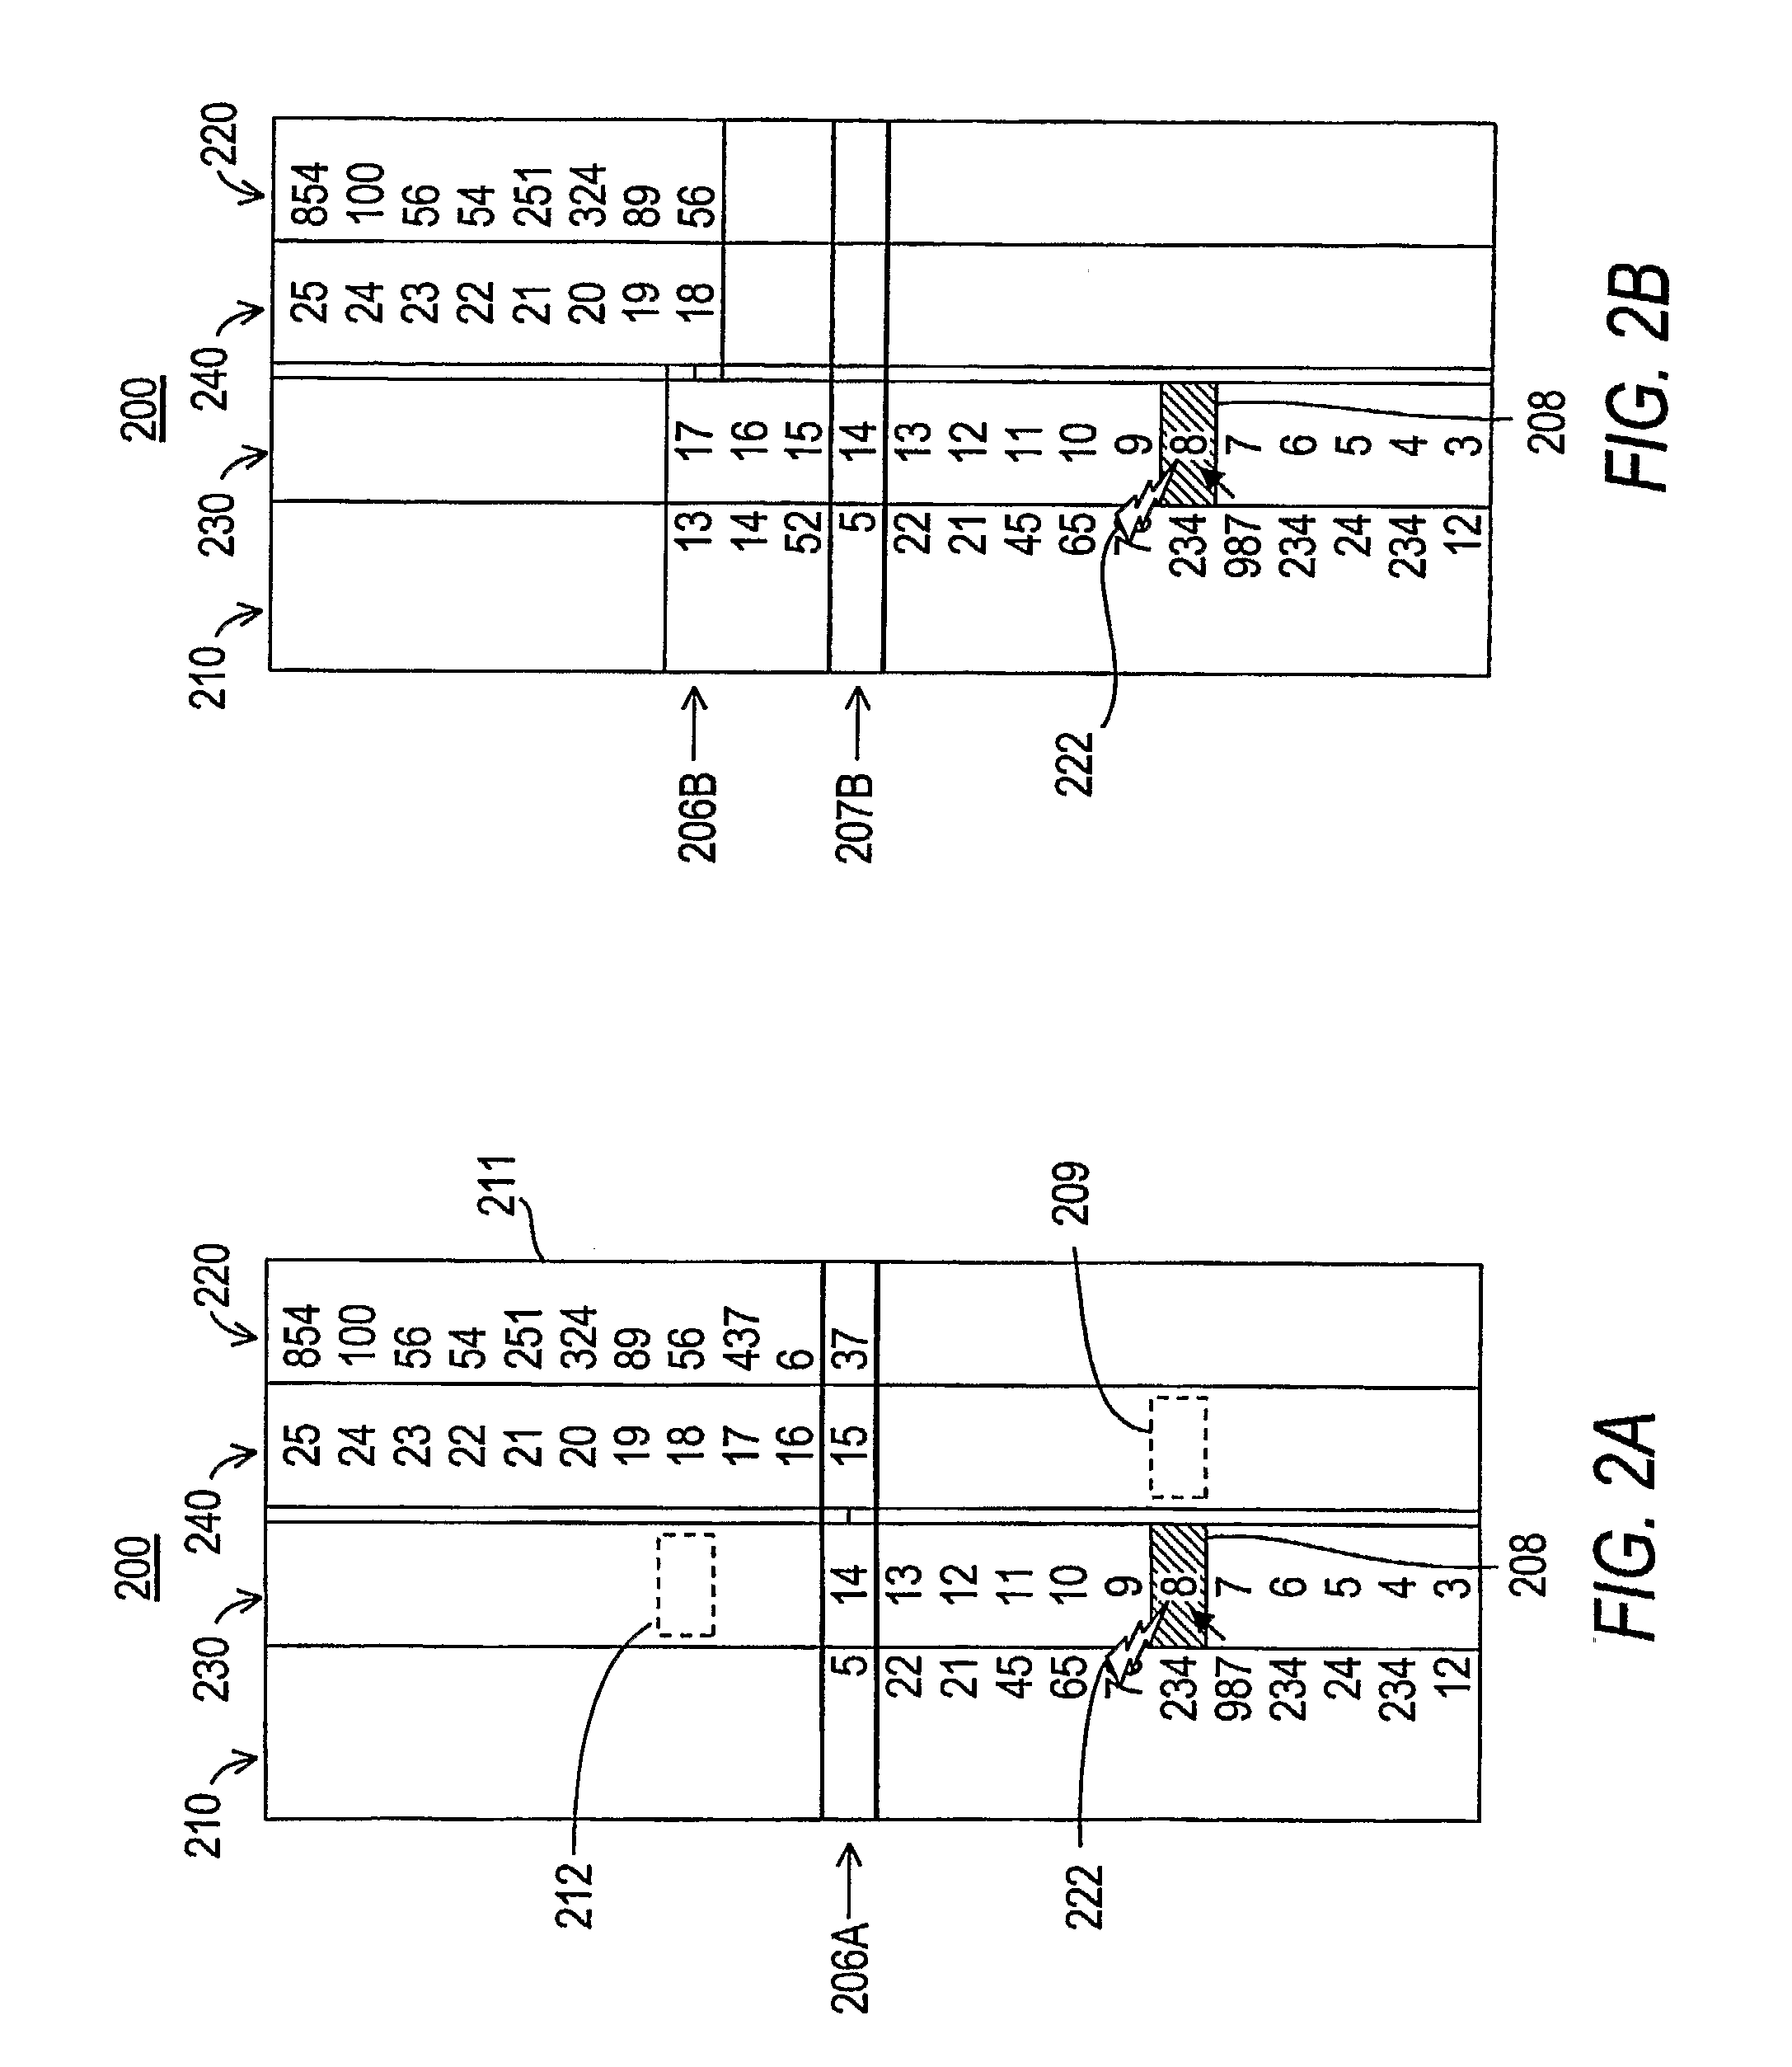 Systems and Methods for Providing Dynamic Price Axes